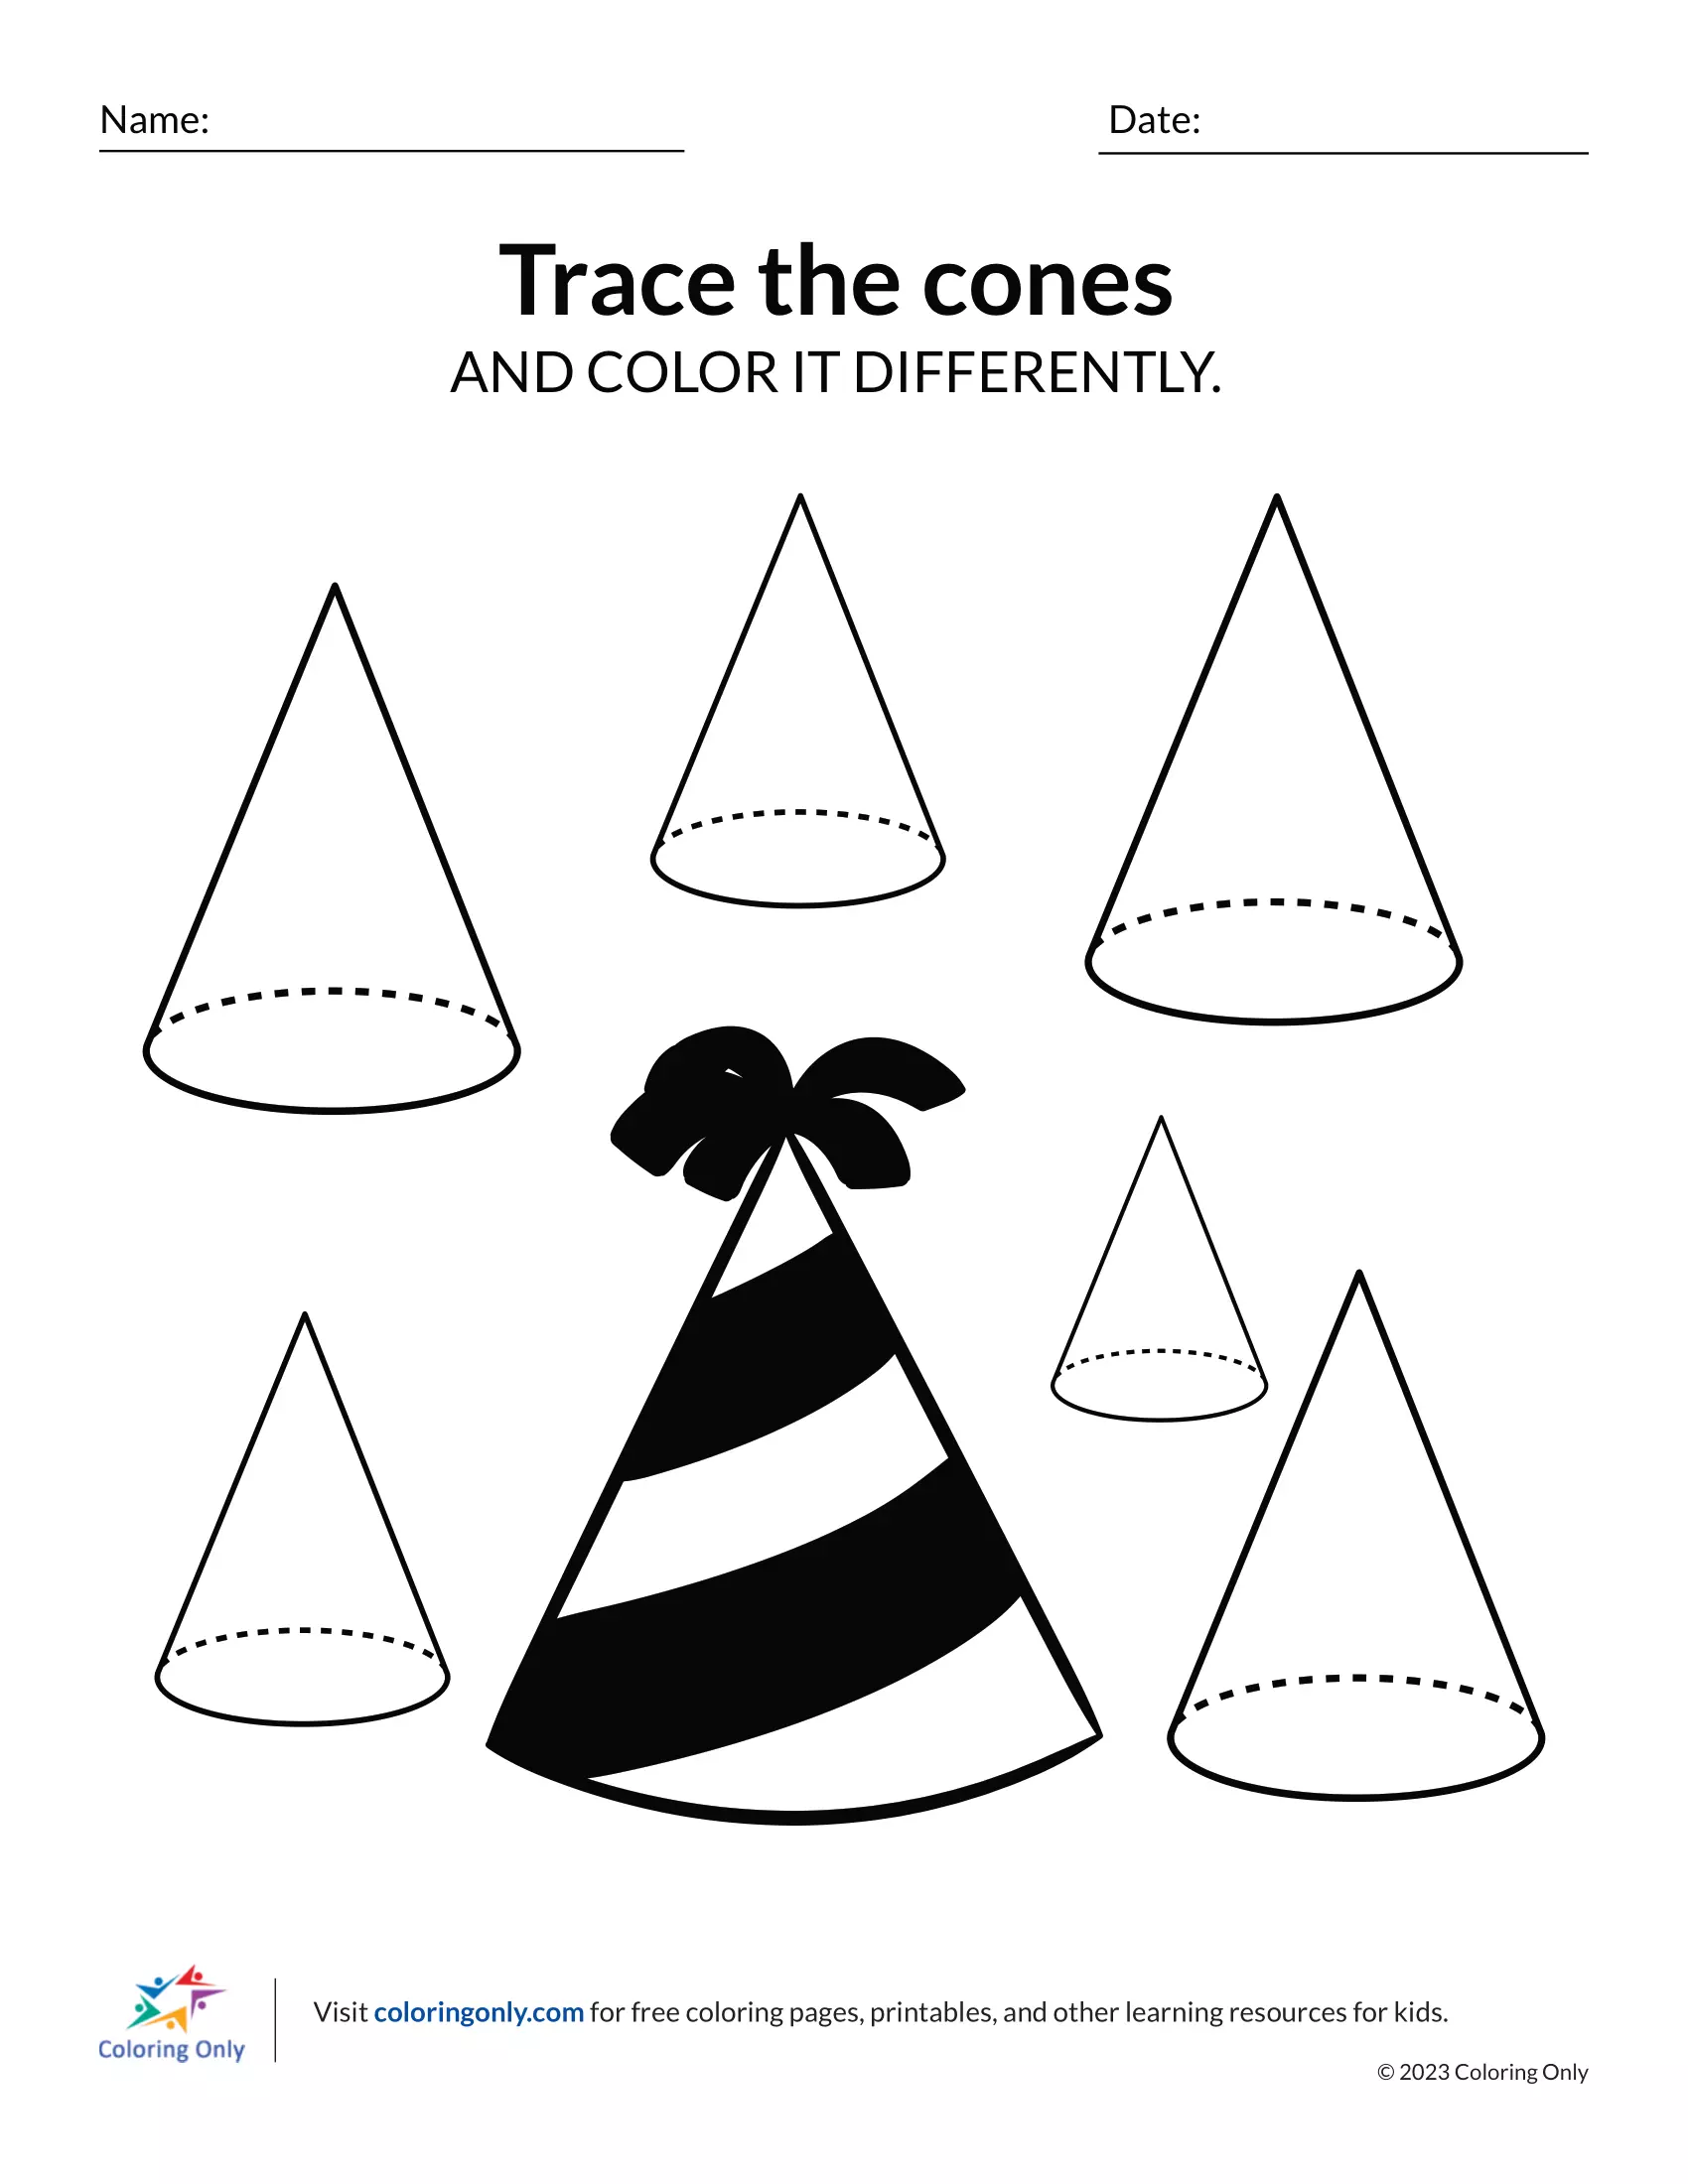 Cone Tracing and Coloring Exercise